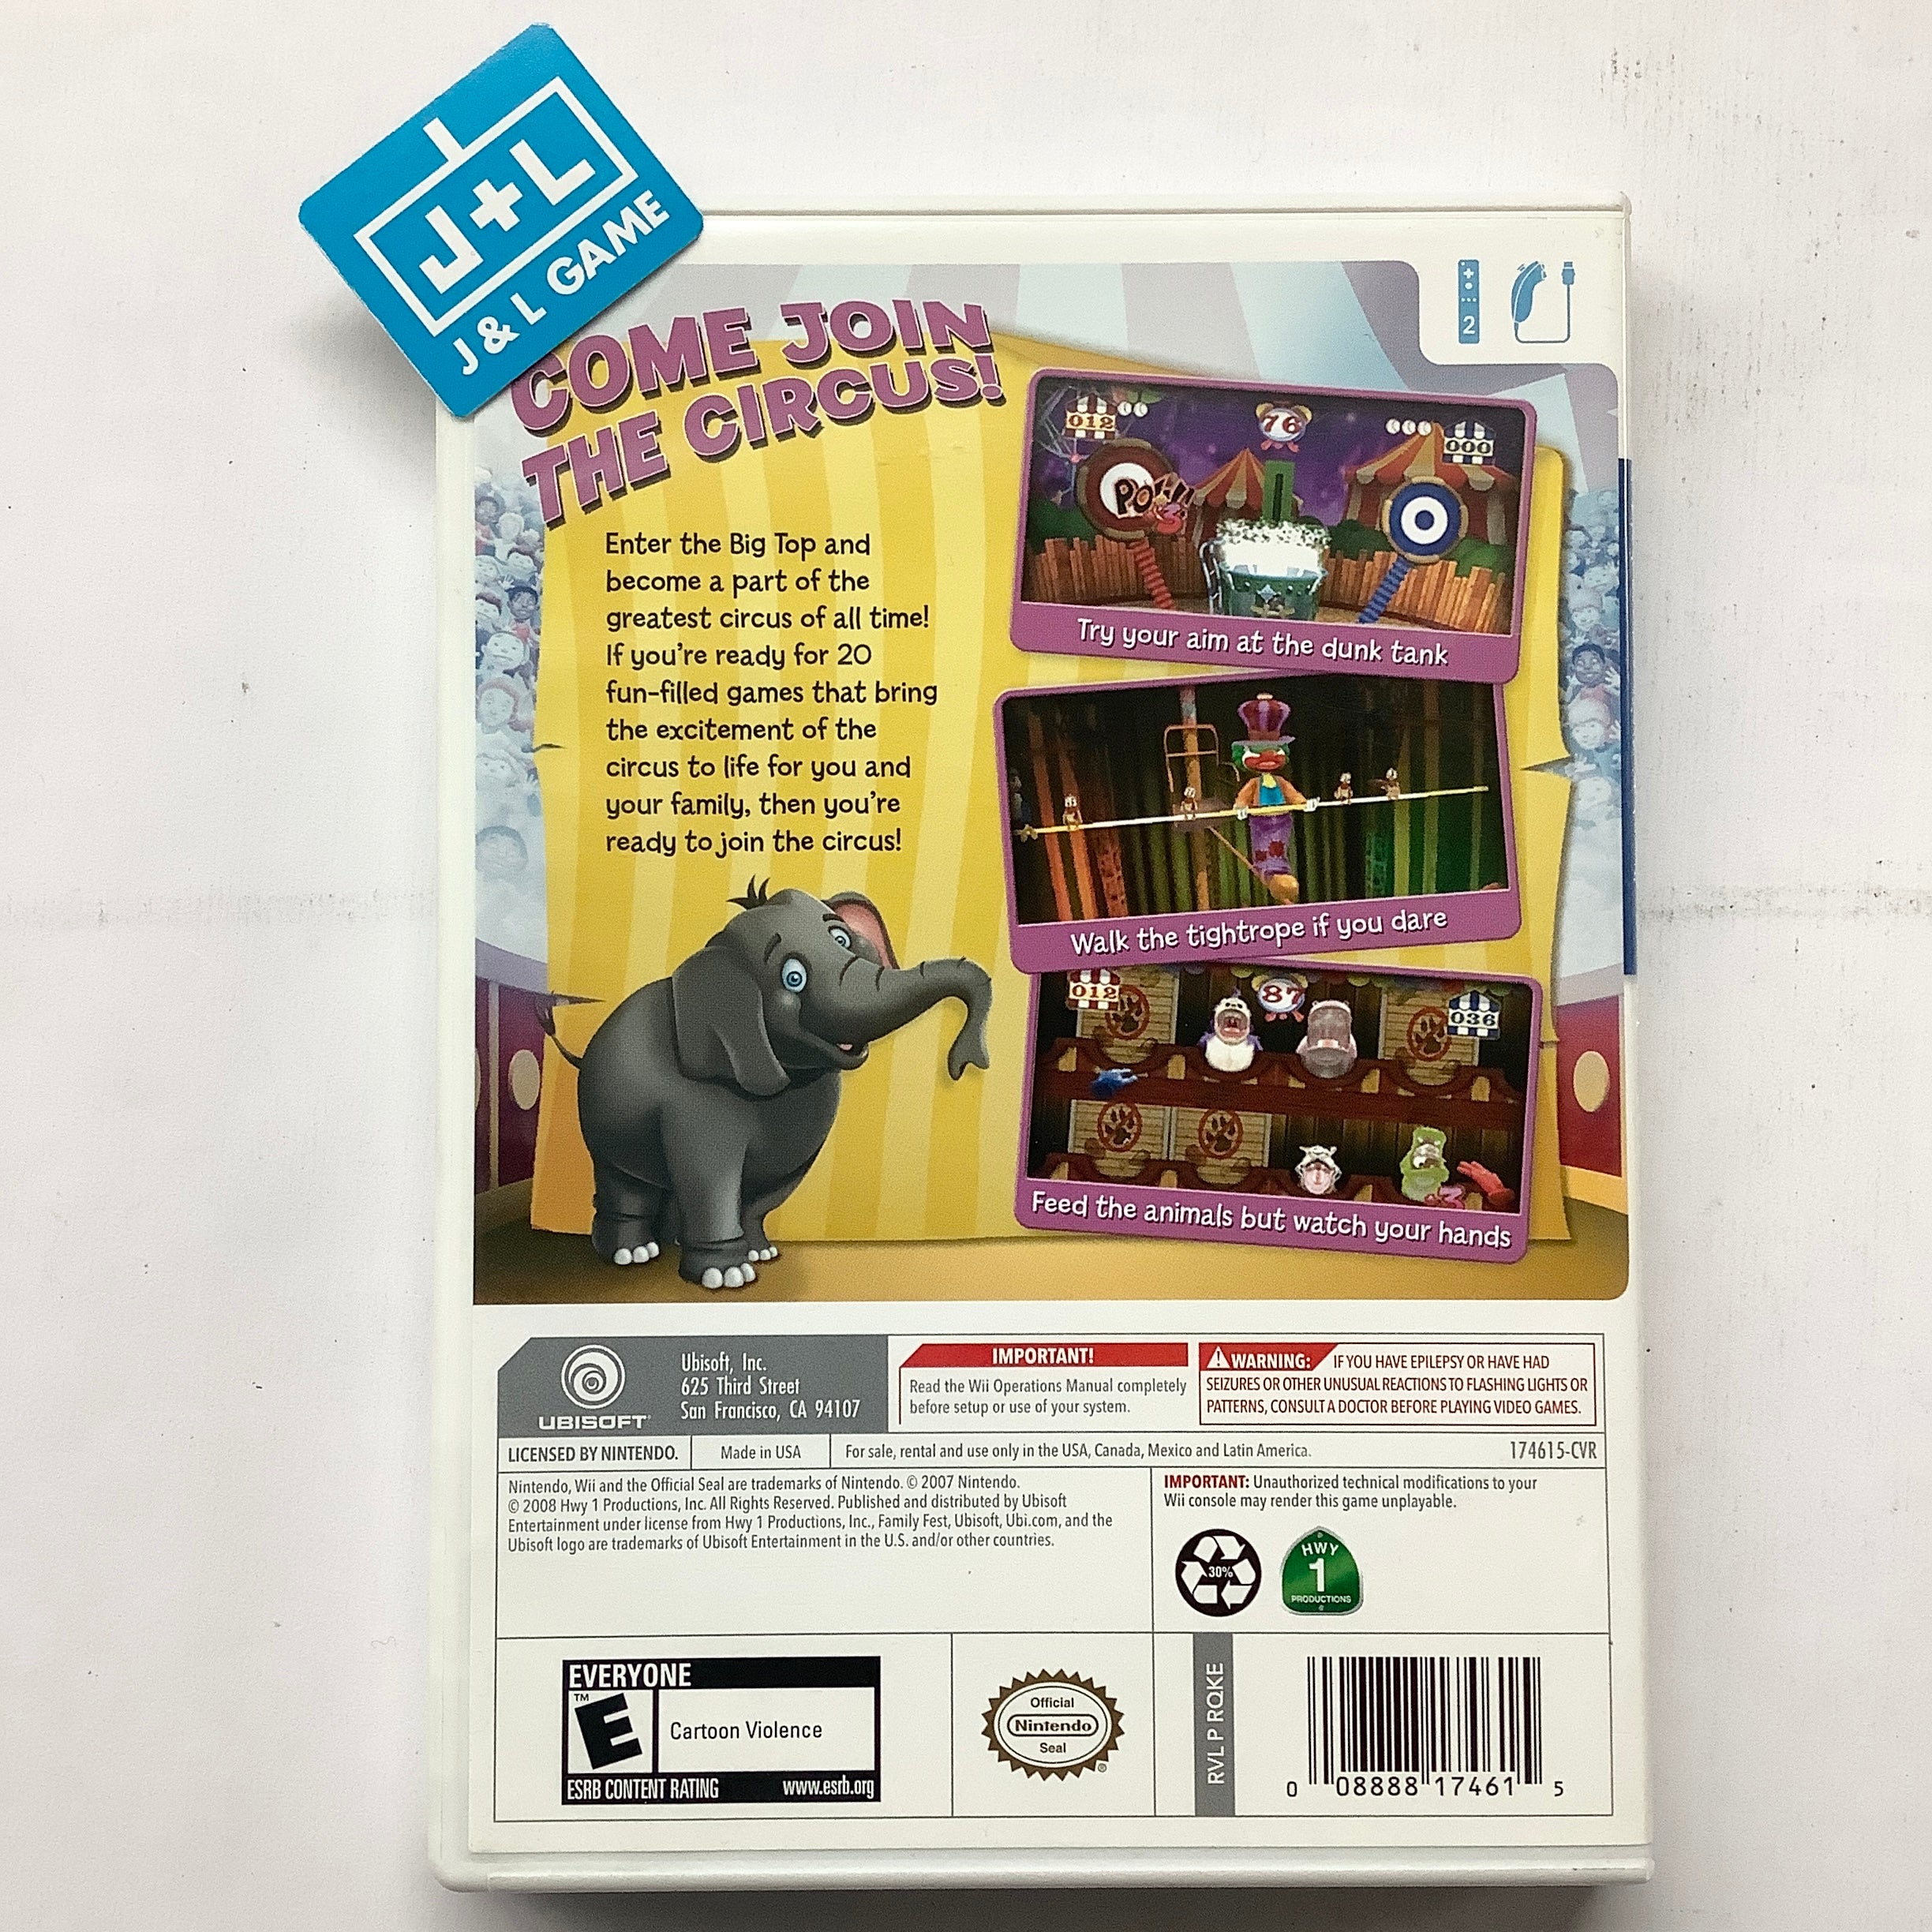 Family Fest Presents Circus Games - Nintendo Wii [Pre-Owned] Video Games Ubisoft   